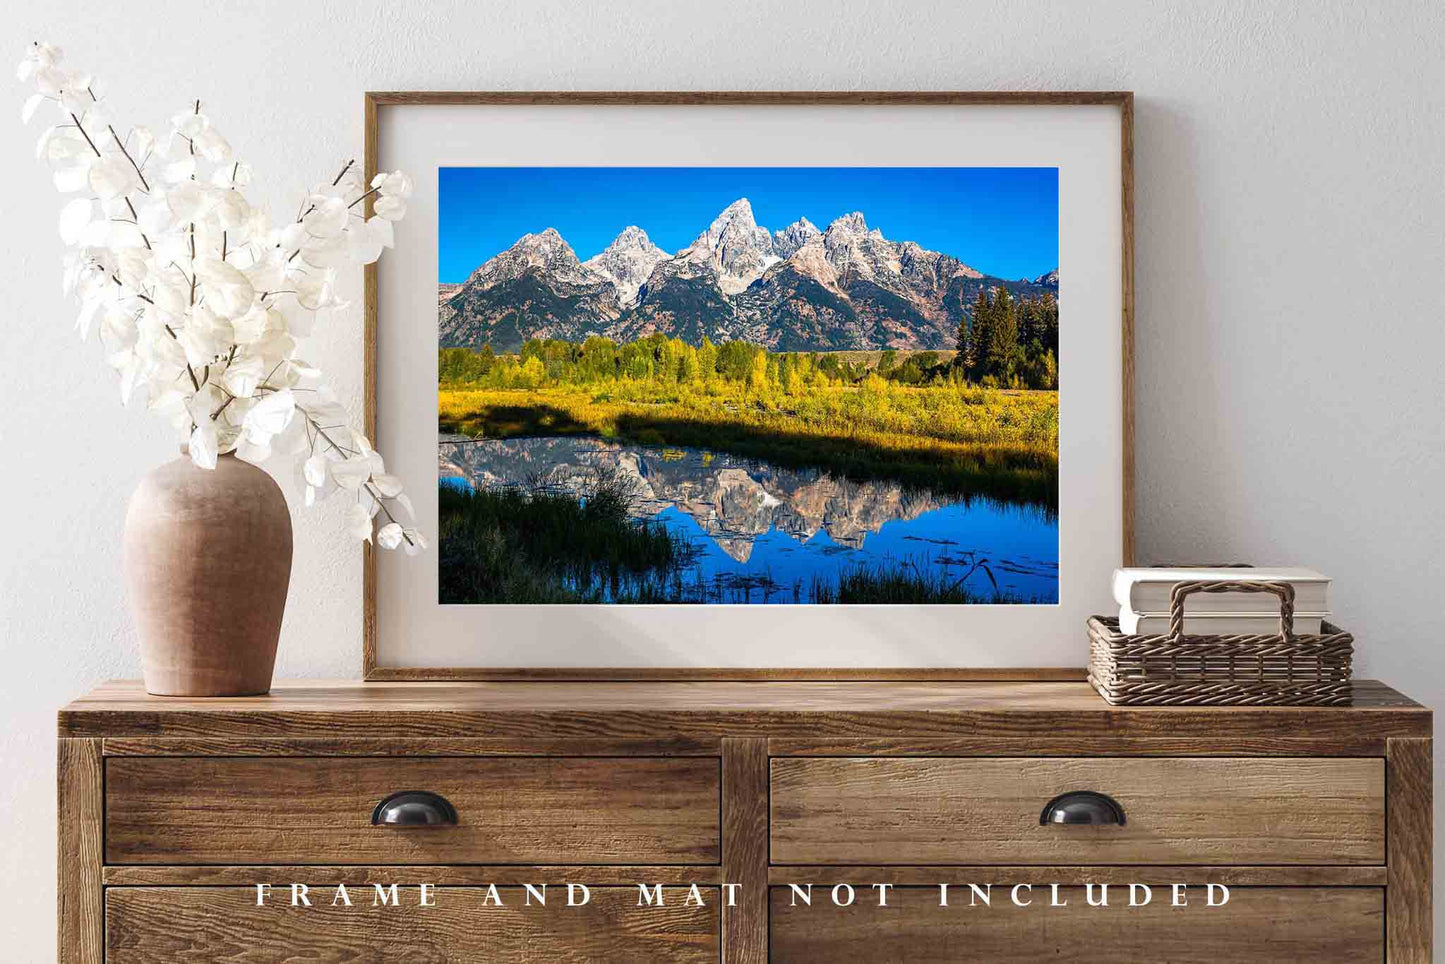 Rocky Mountain Photography Print (Not Framed) Picture of Grand Teton at Schwabacher Landing in Wyoming Landscape Wall Art Western Decor